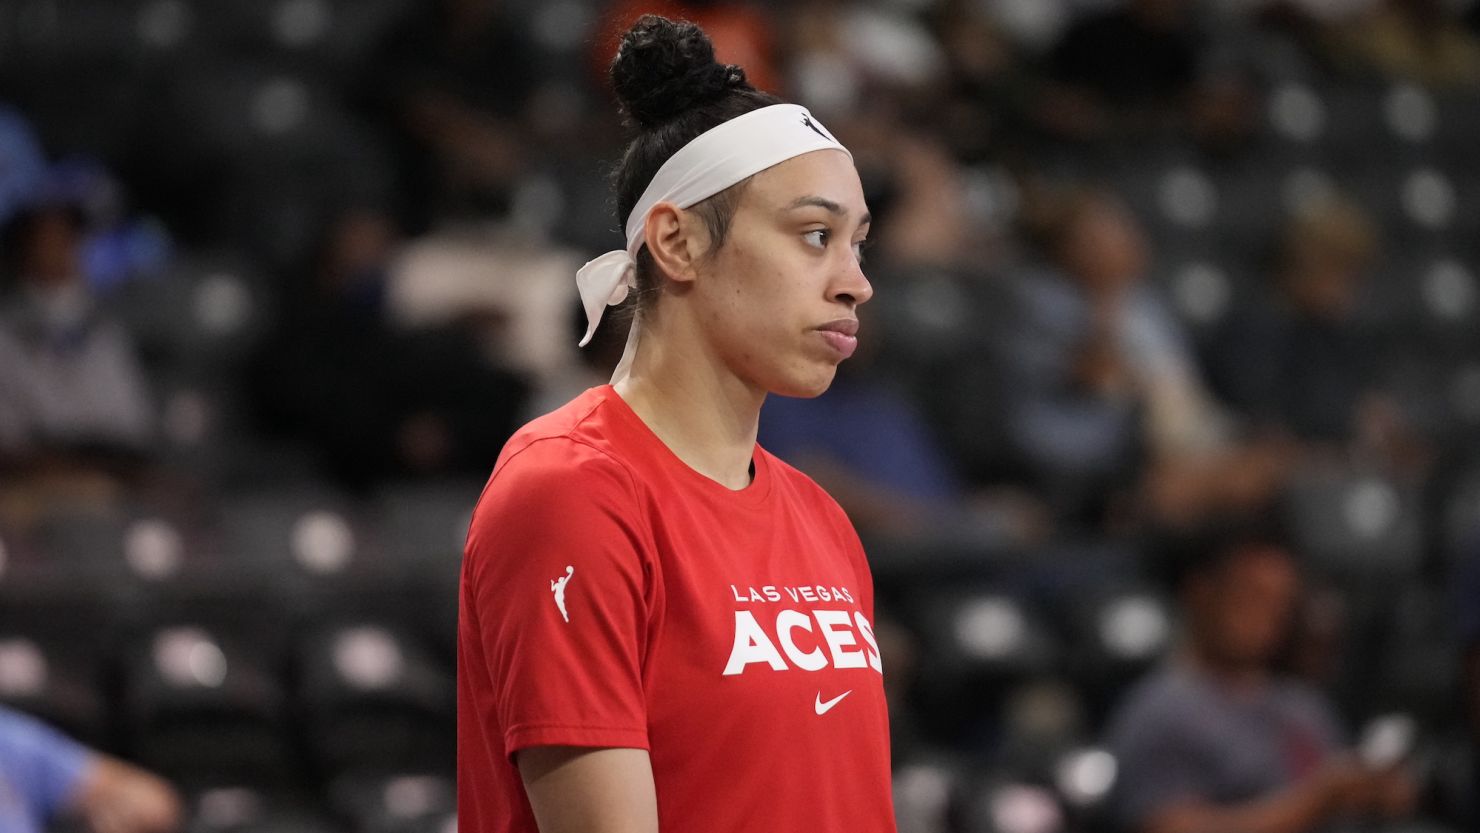 COLLEGE PARK, GA - MAY 13: Dearica Hamby #5 of the Las Vegas Aces looks on before the game against the Atlanta Dream on May 13, 2022 at the Gateway Center Arena in College Park, Georgia. NOTE TO USER: User expressly acknowledges and agrees that, by downloading and/or using this Photograph, user is consenting to the terms and conditions of the Getty Images License Agreement. Mandatory Copyright Notice: Copyright 2022 NBAE (Photo by Dale Zanine/NBAE via Getty Images)